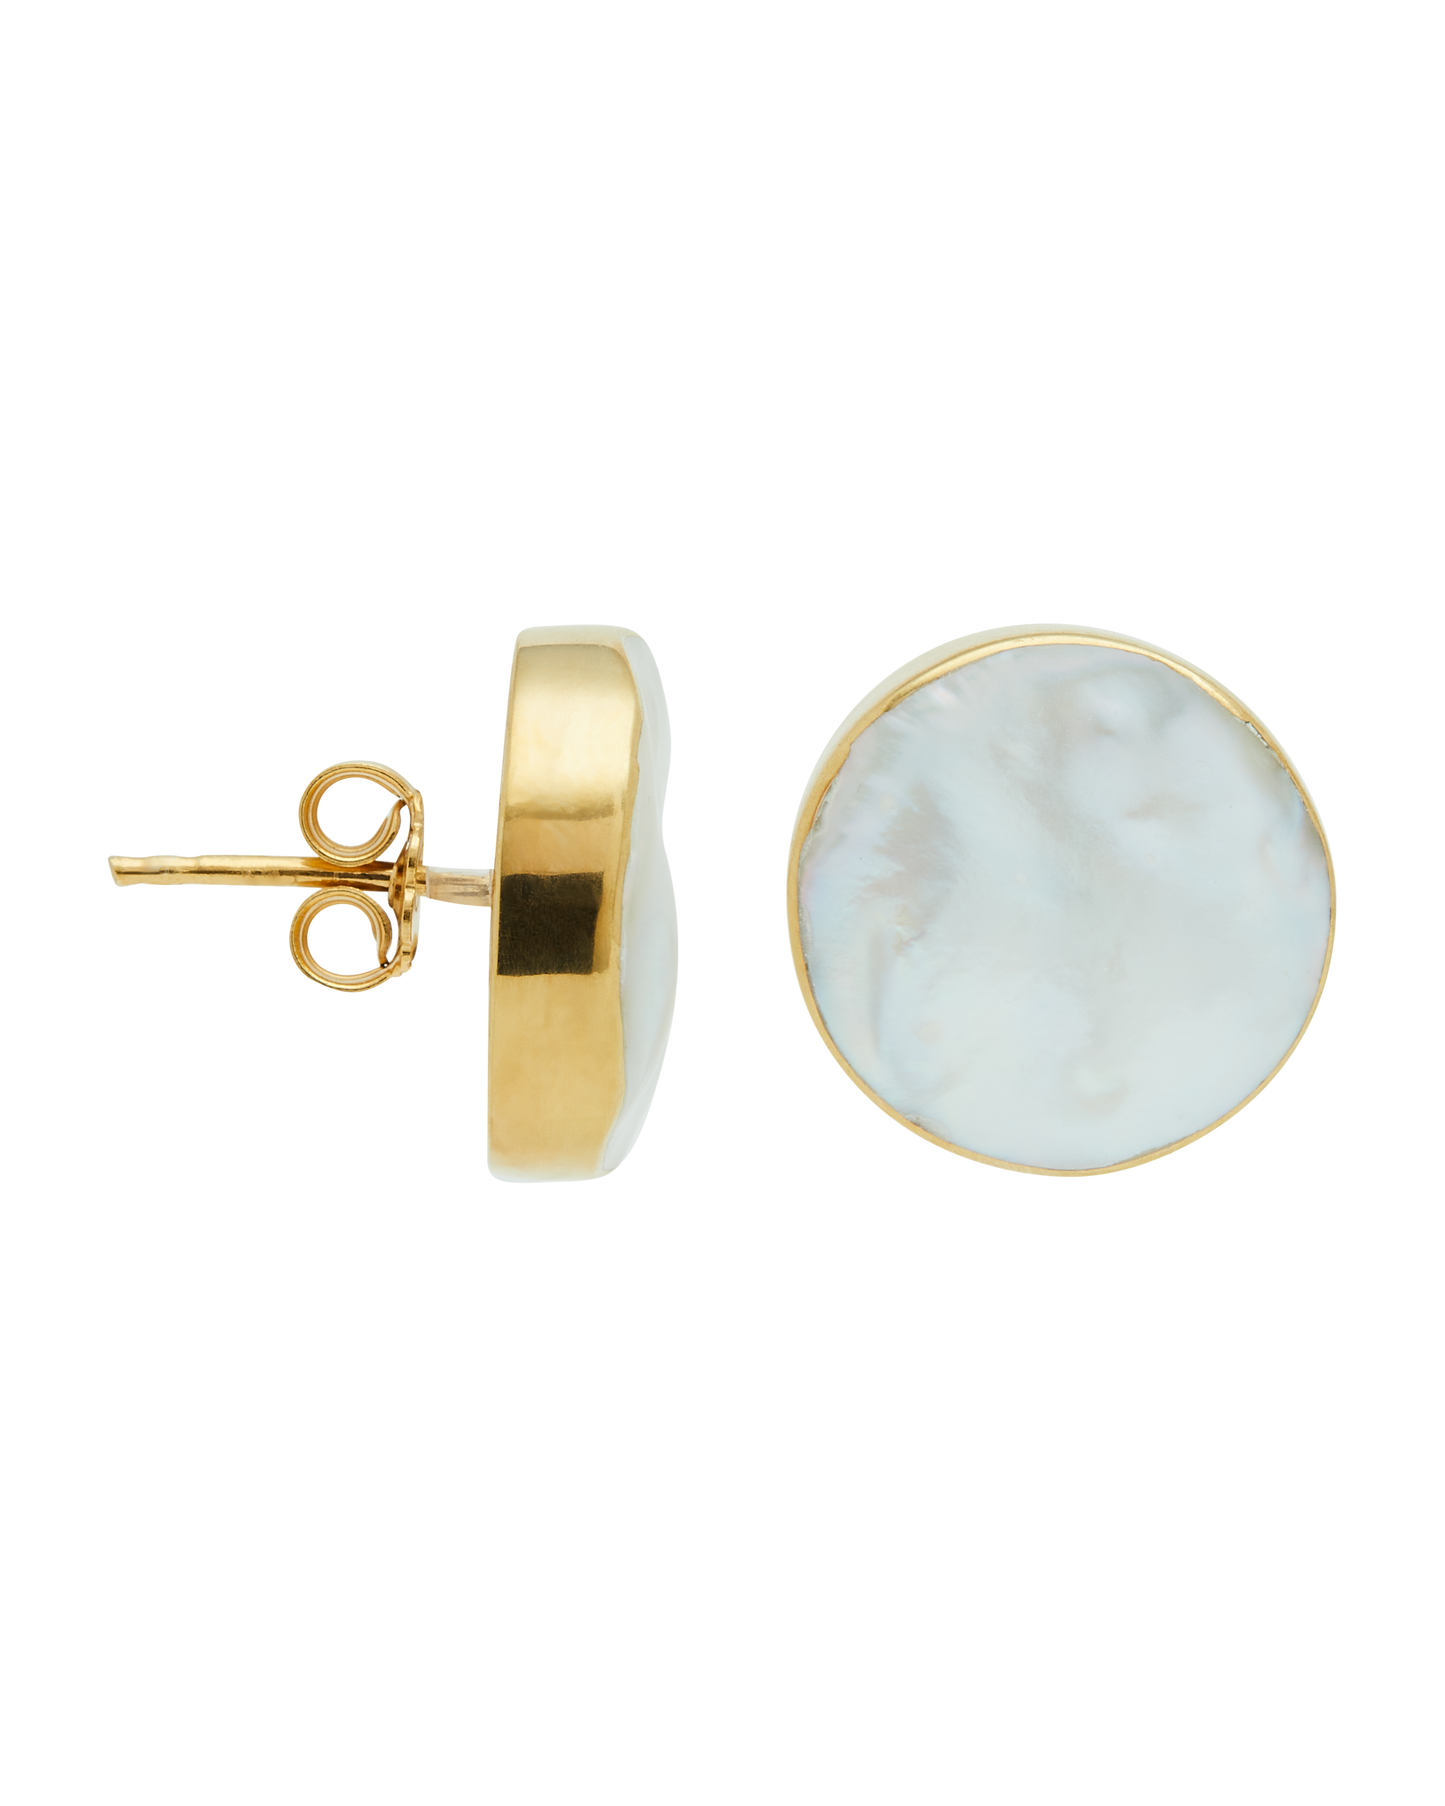 Natural Keishi Pearl Stud Earrings in Silver 925 with 18kt Gold Plate